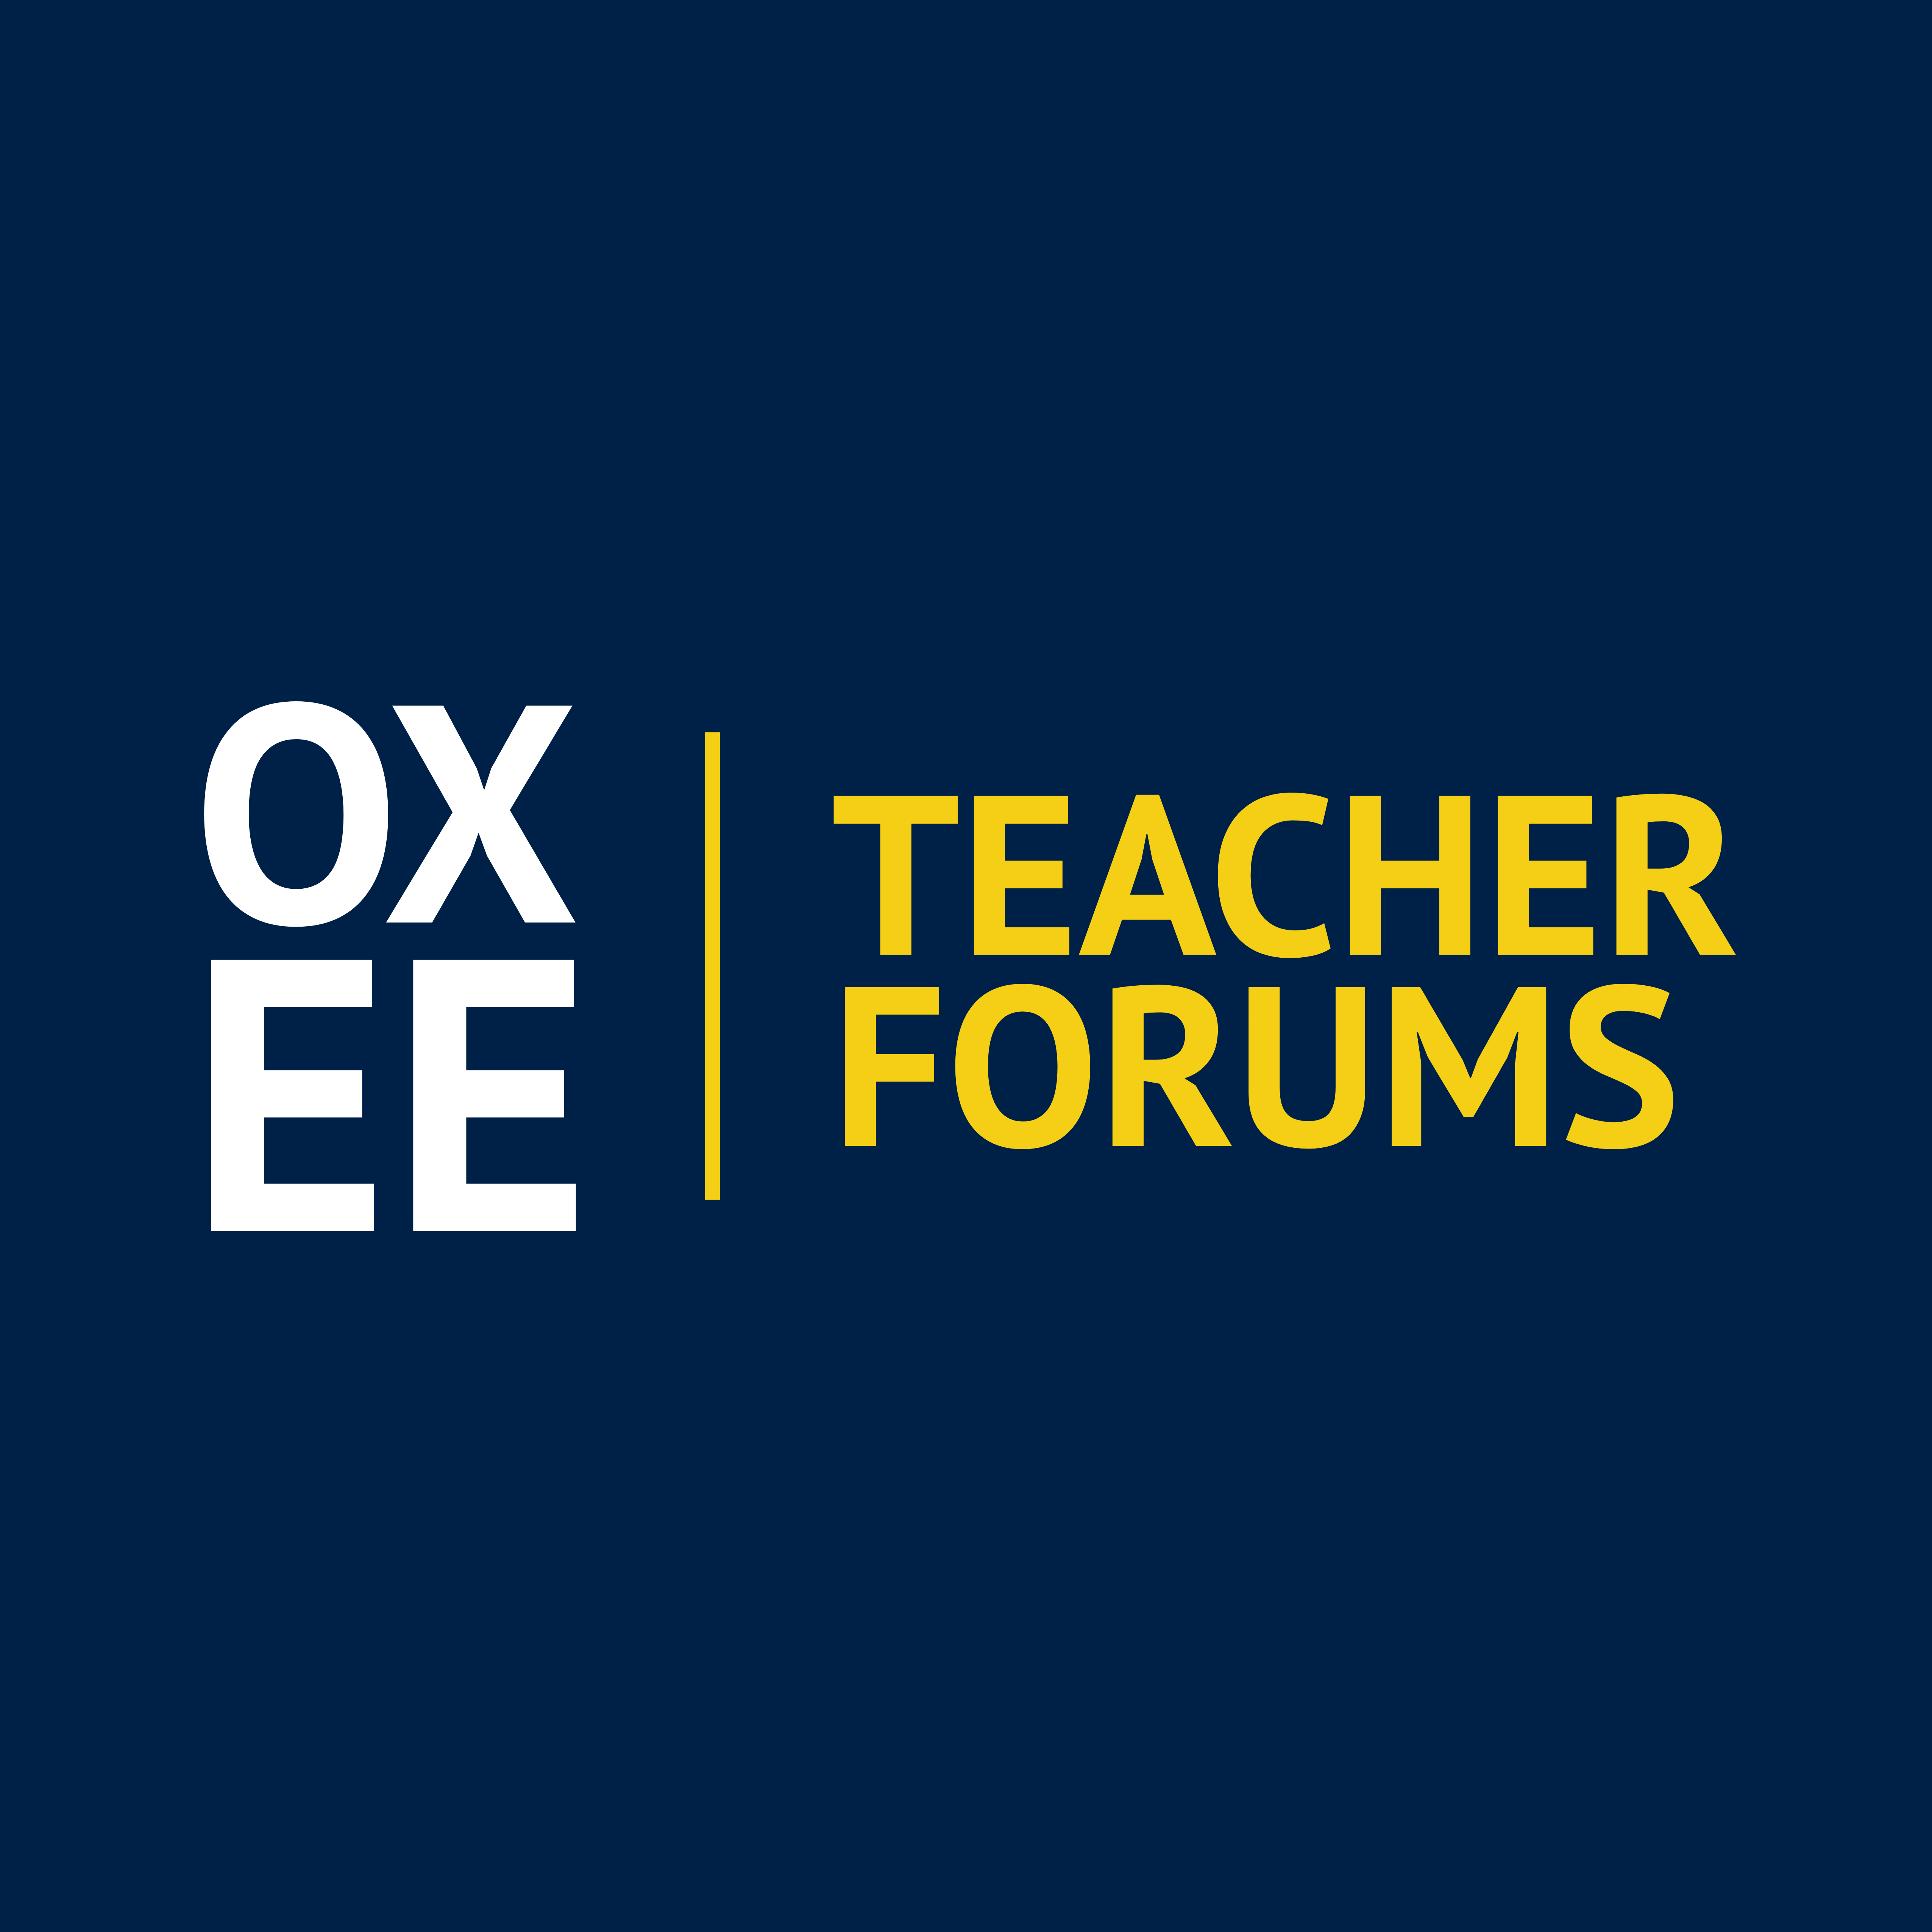 OXEE Teacher Forums text on navy background